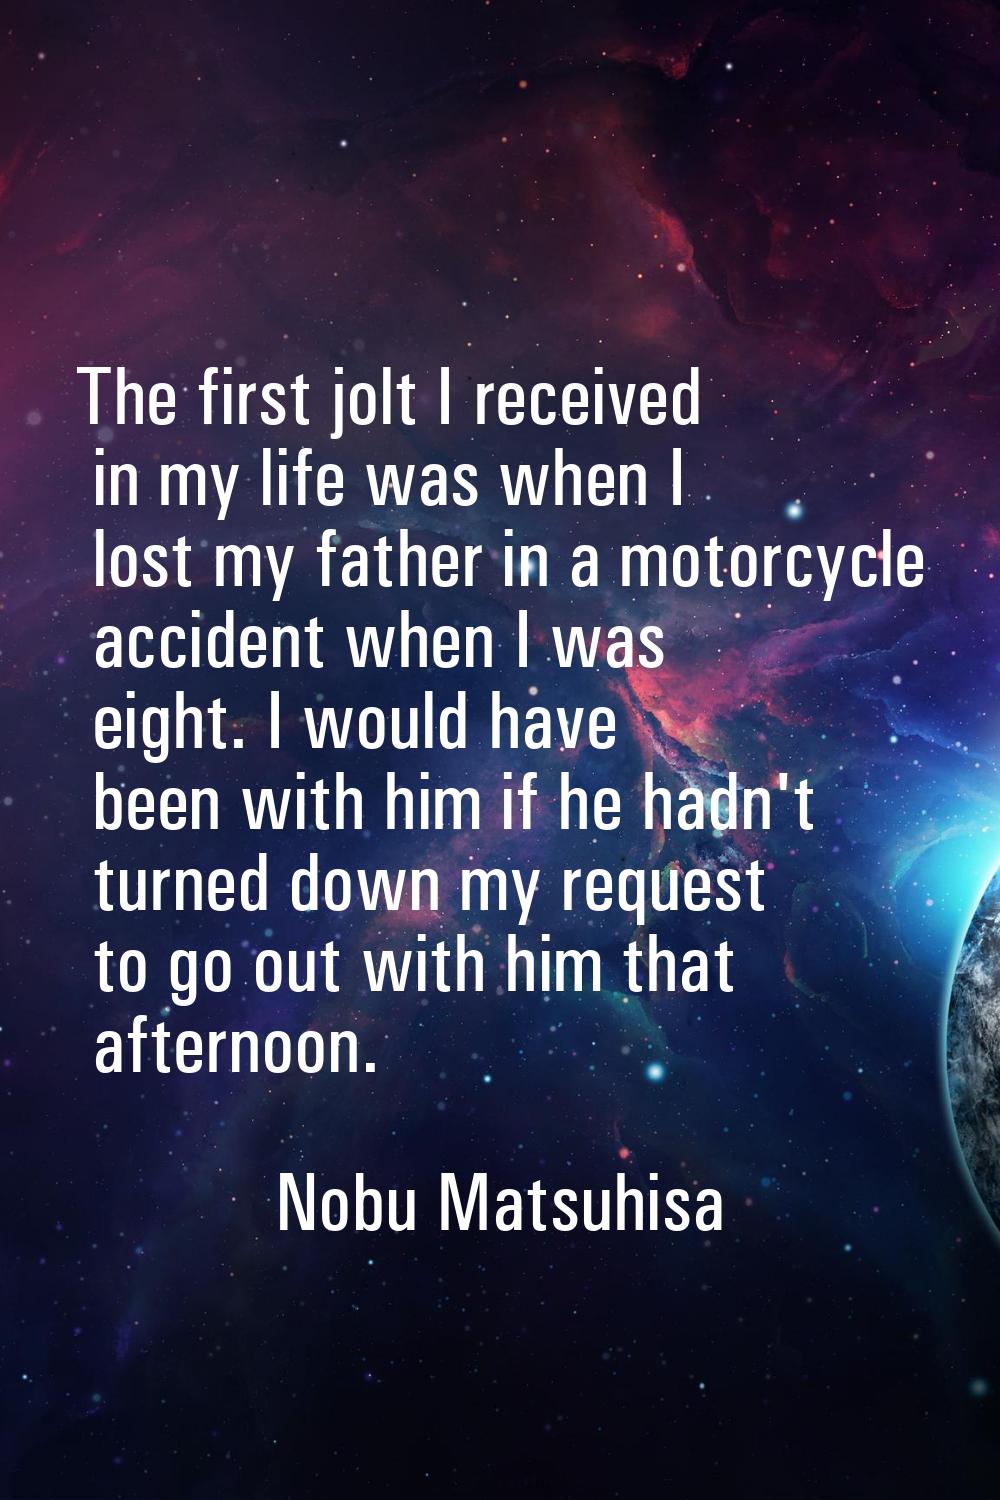 The first jolt I received in my life was when I lost my father in a motorcycle accident when I was 